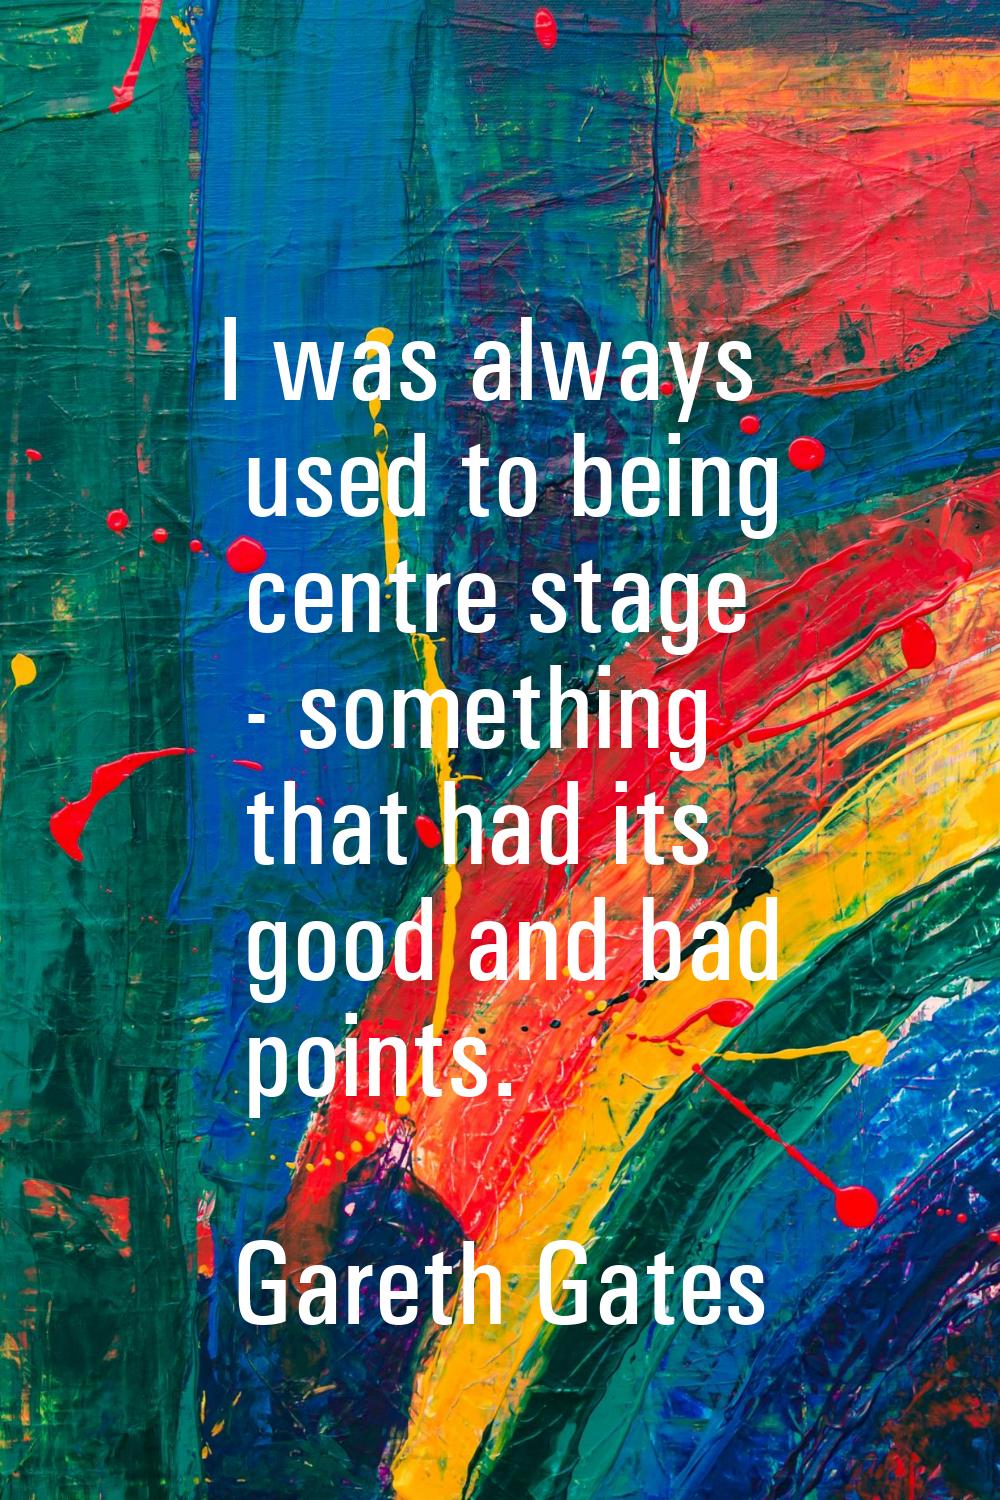 I was always used to being centre stage - something that had its good and bad points.